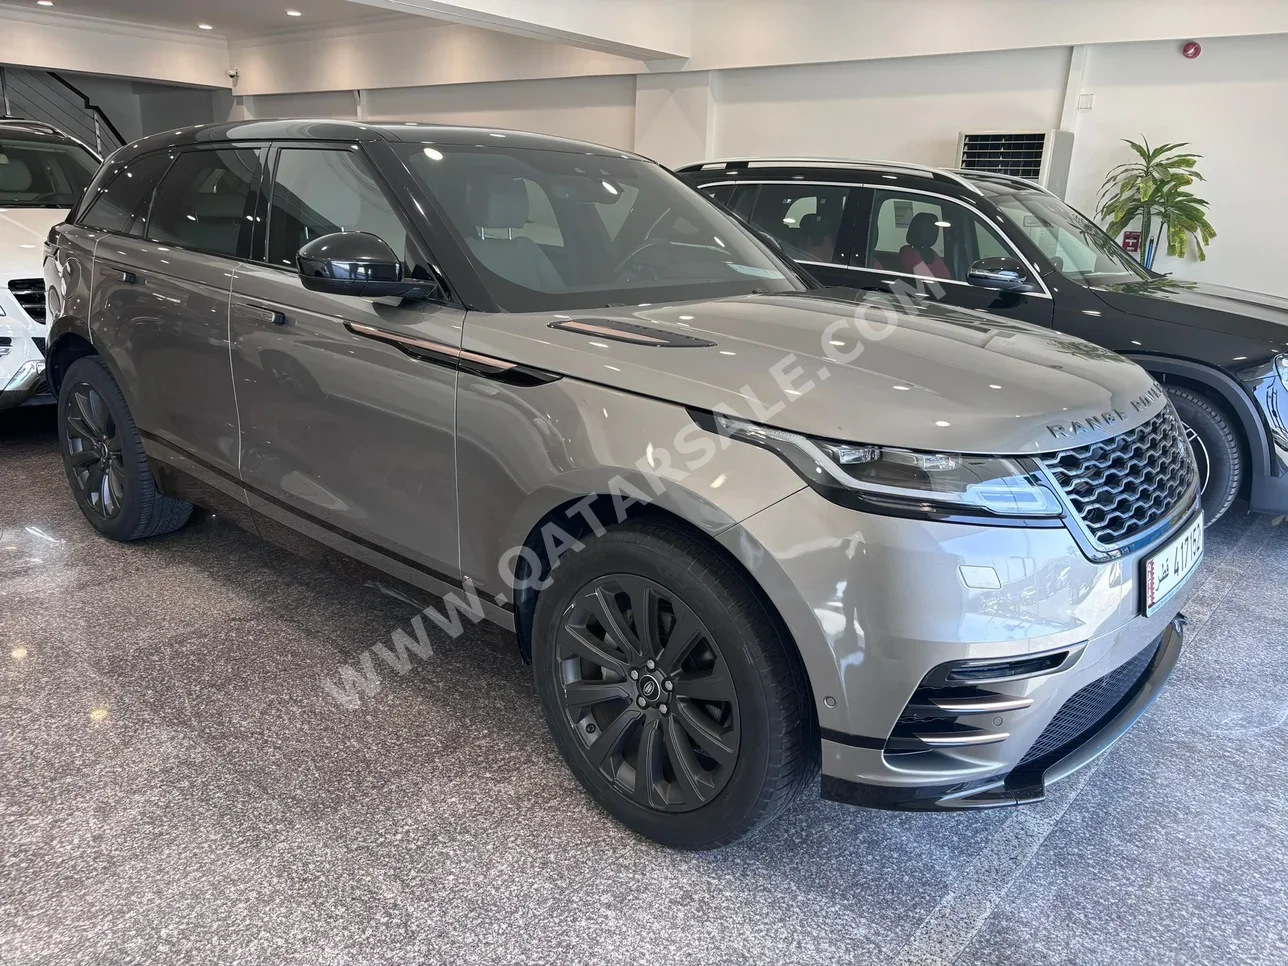 Land Rover  Range Rover  Velar  2019  Automatic  90,000 Km  4 Cylinder  Four Wheel Drive (4WD)  SUV  Silver